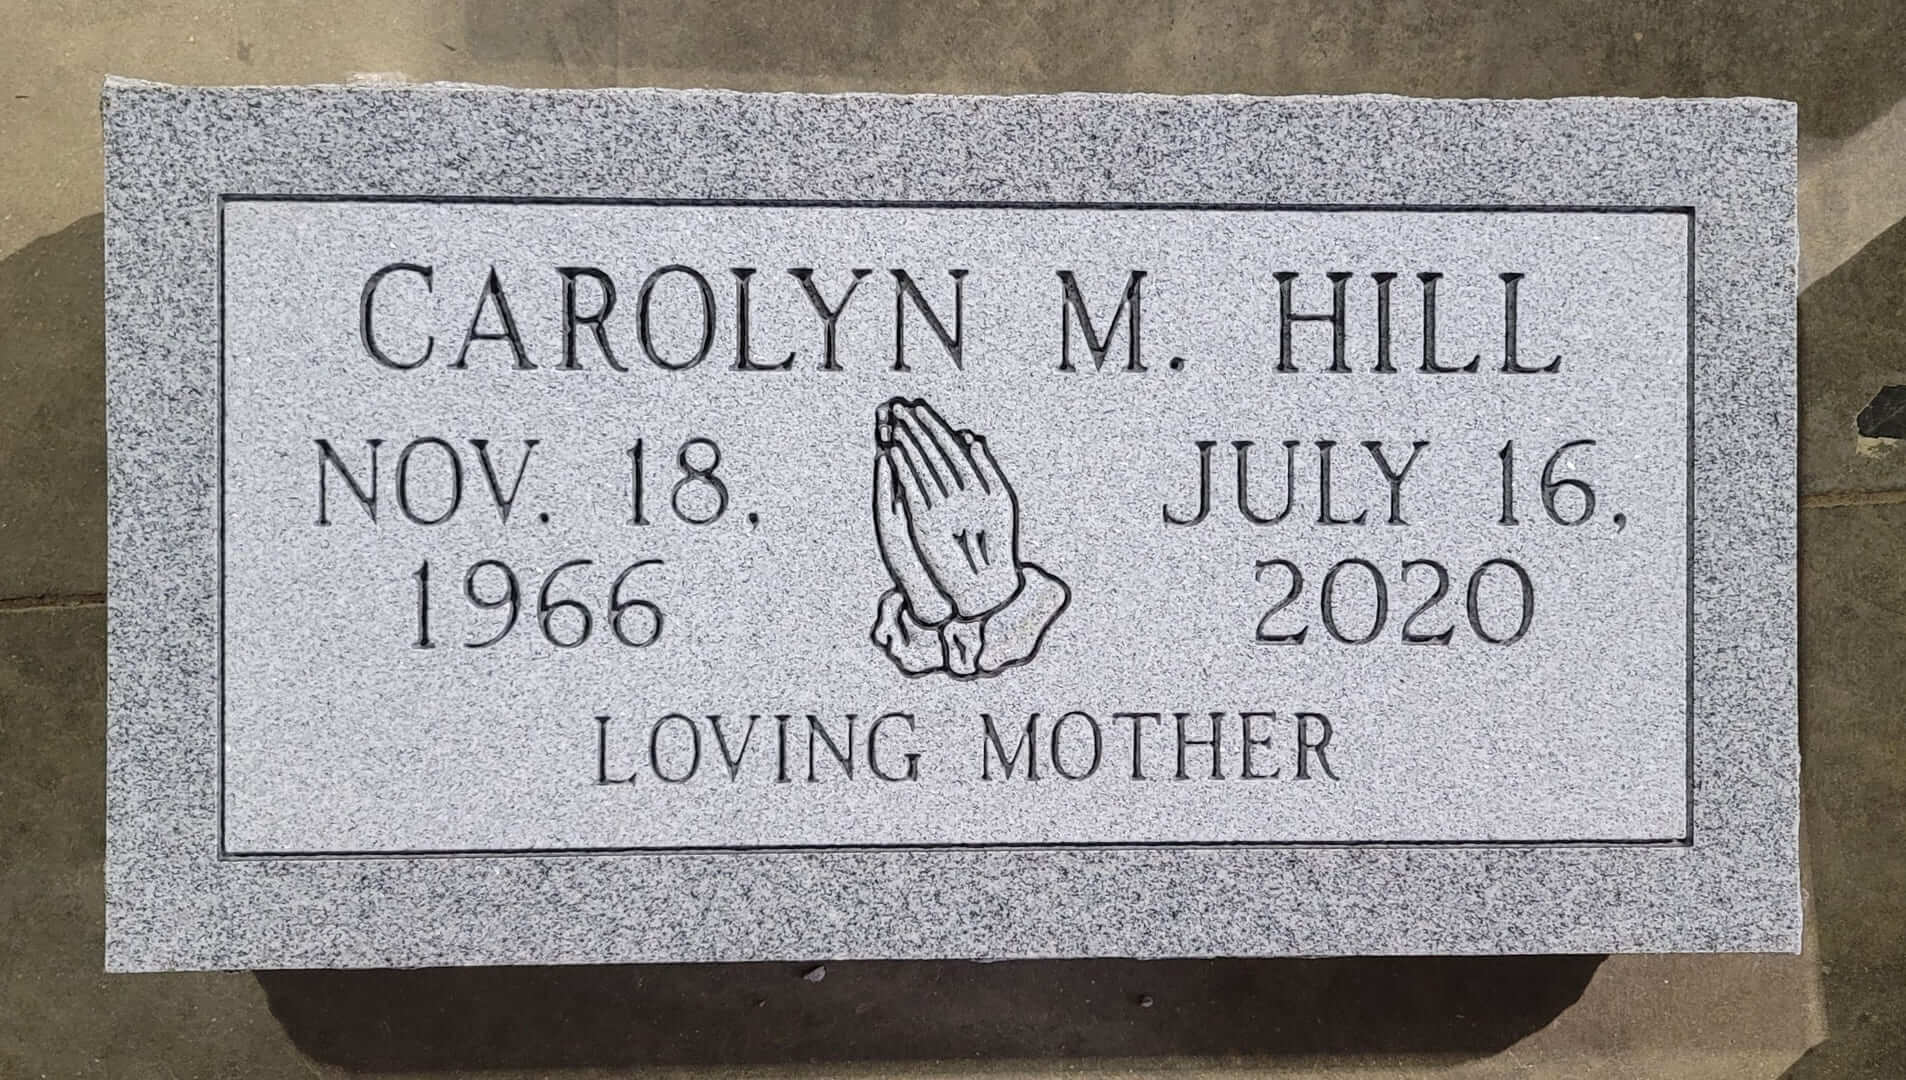 Carolyn M Hull Memorial Slab WIth Loving Mother Engraved